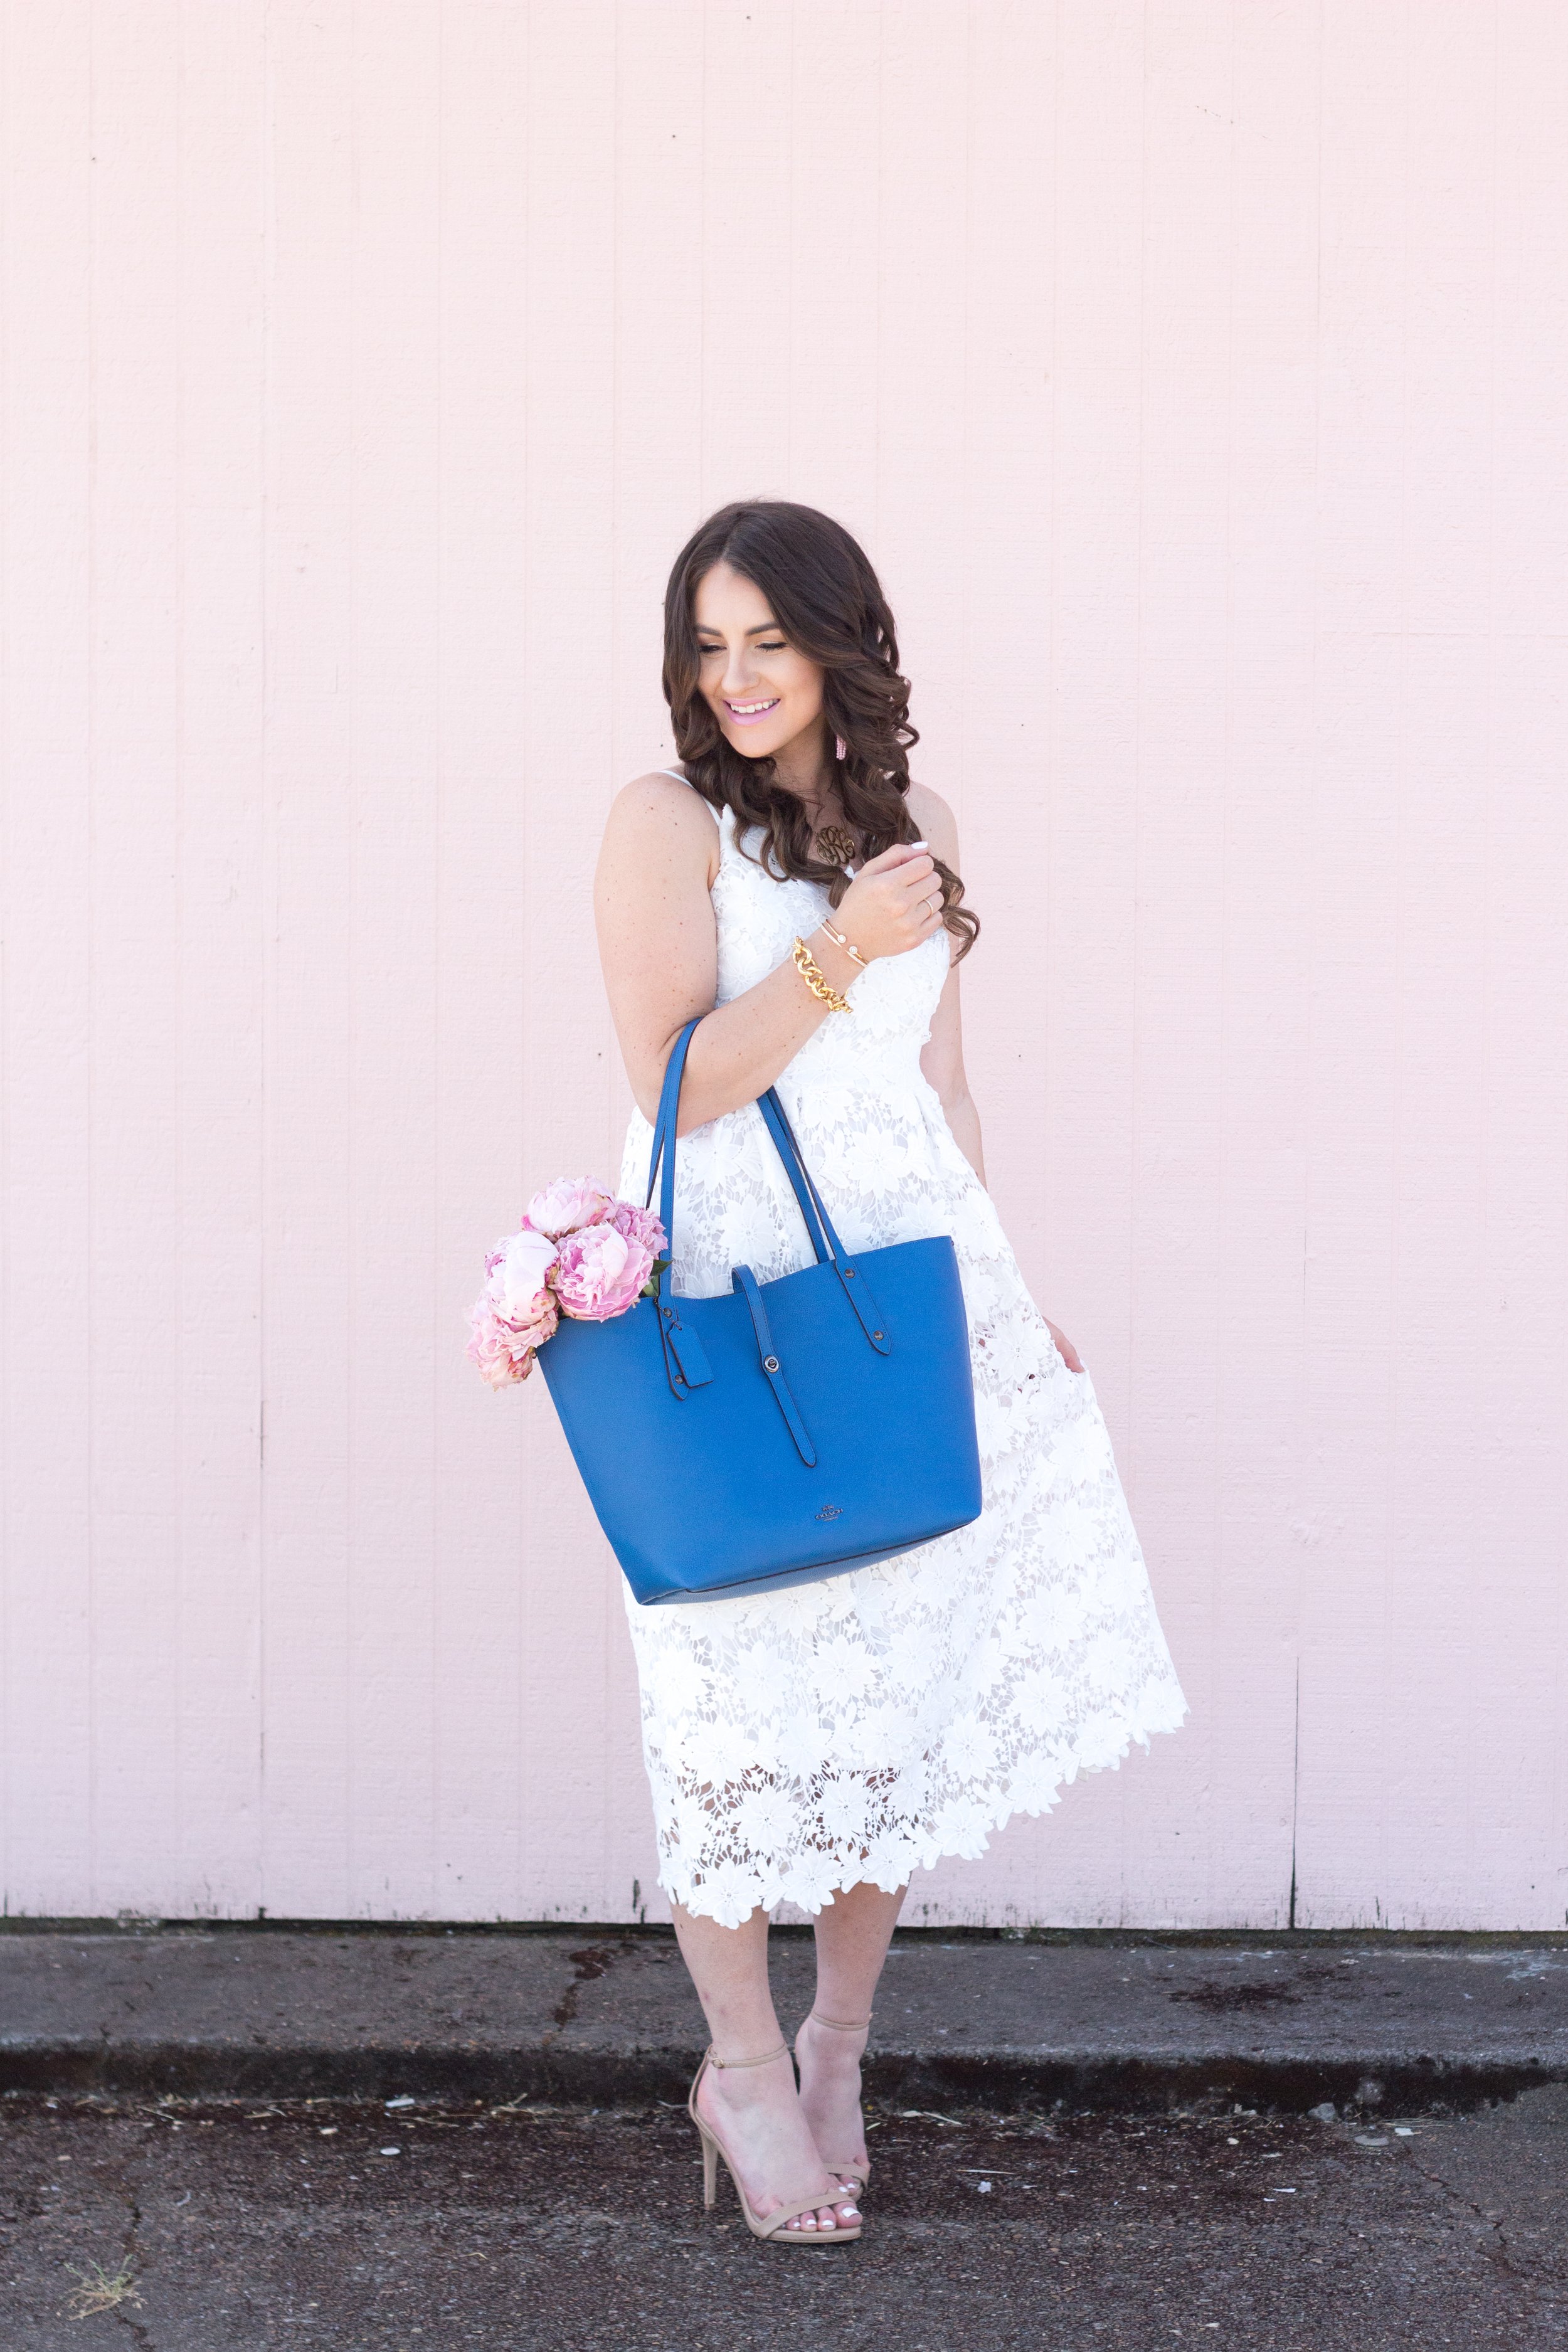 Classic style for Summer in this white dress and blue coach bag for inspiration.